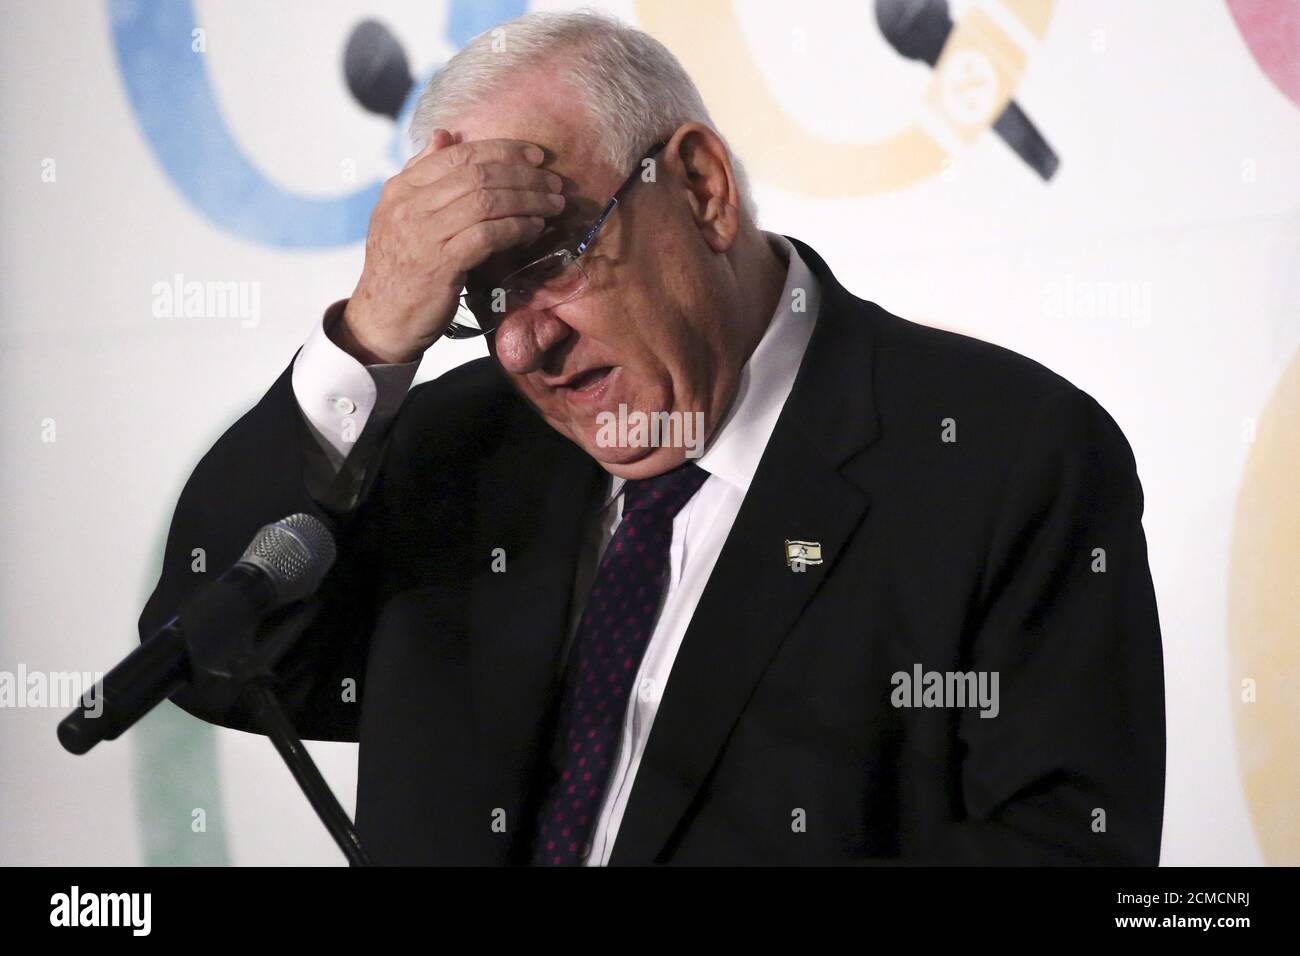 Israeli President Reuven Rivlin addresses attendees at the 'Haaretz Q: with New Israel Fund' event at The Roosevelt Hotel in the Manhattan borough of New York City, December 13, 2015. REUTERS/Andrew Kelly Stock Photo